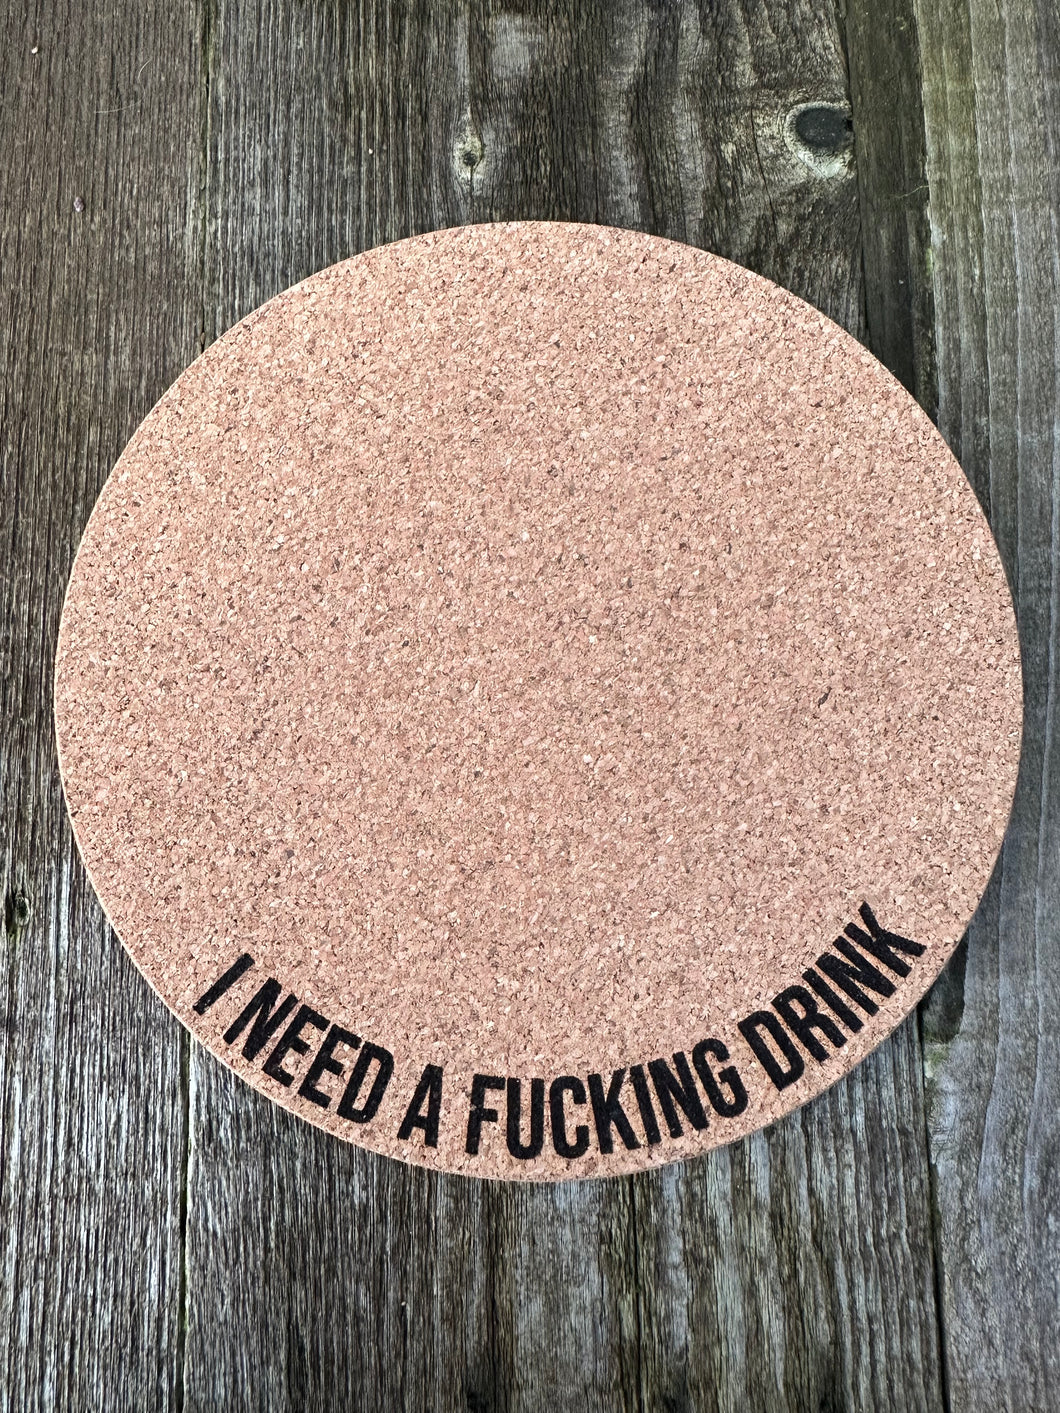 I Need a Fucking Drink Cork Plant Mat - Engraved Cork Round - Cork Bottom - No Plastic or Rubber - All Natural Material